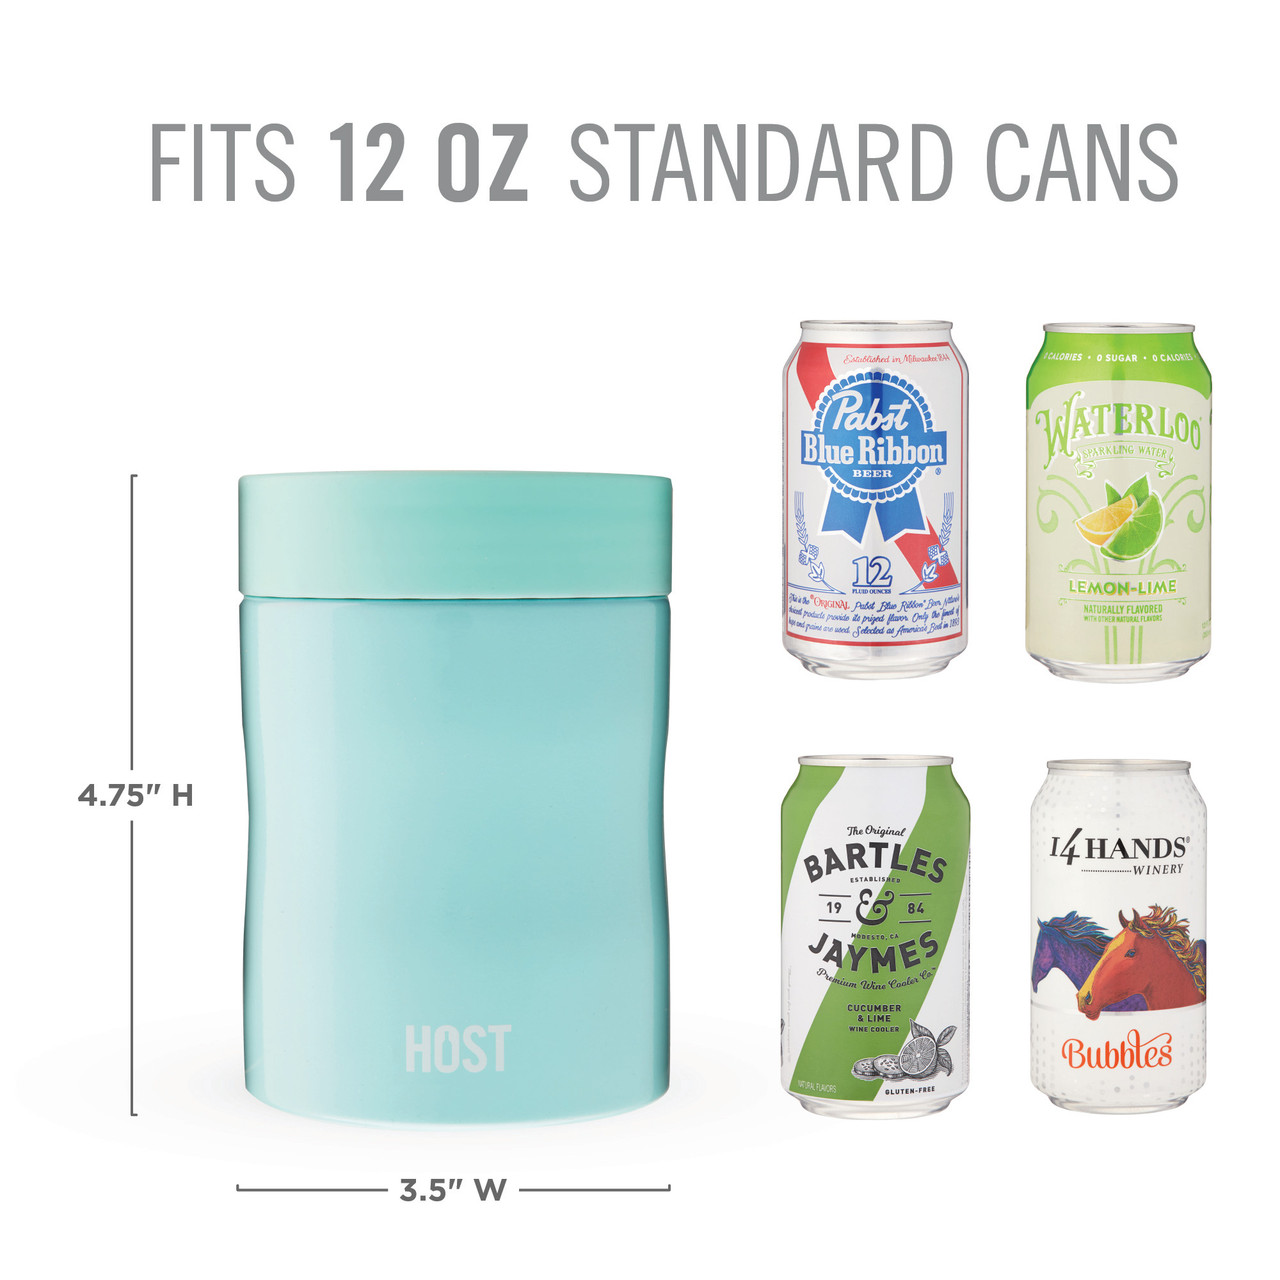 Stay-Chill Standard Can Cooler in Seaglass by HOST®